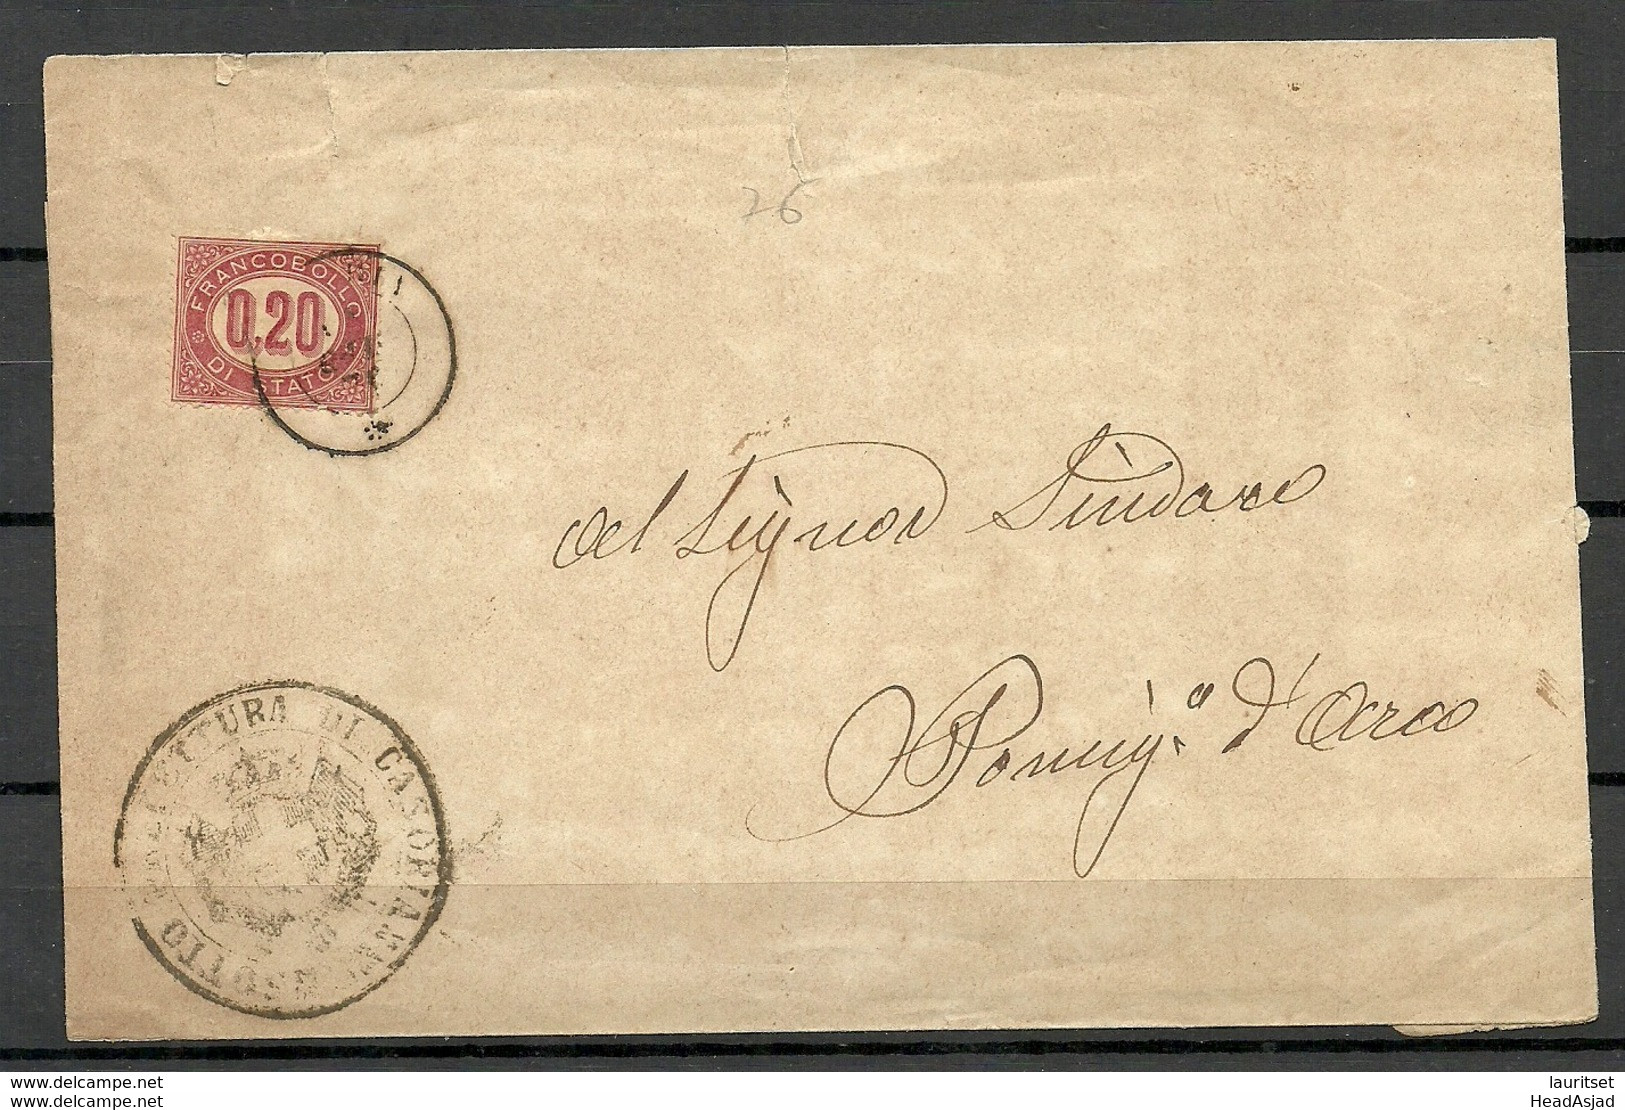 ITALY 1878 Cover Michel 3 Duty Stamp Official As Single - Service